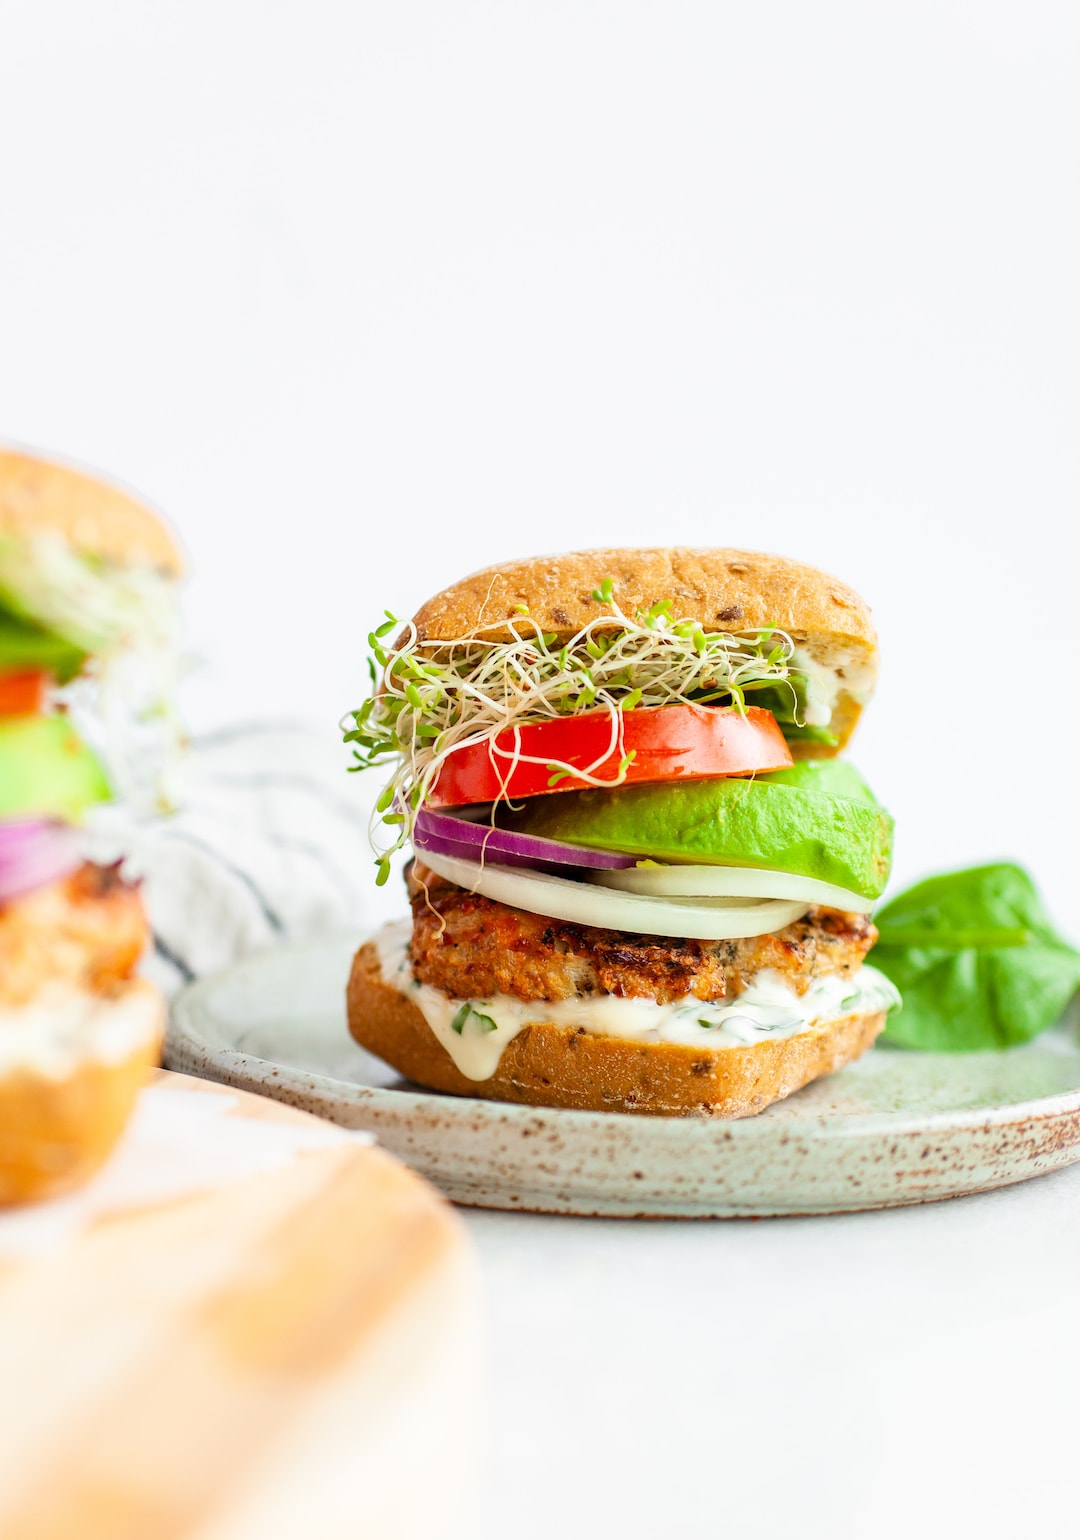 turkey burgers stacked with avocado, tomato, and sprouts on a grain bun